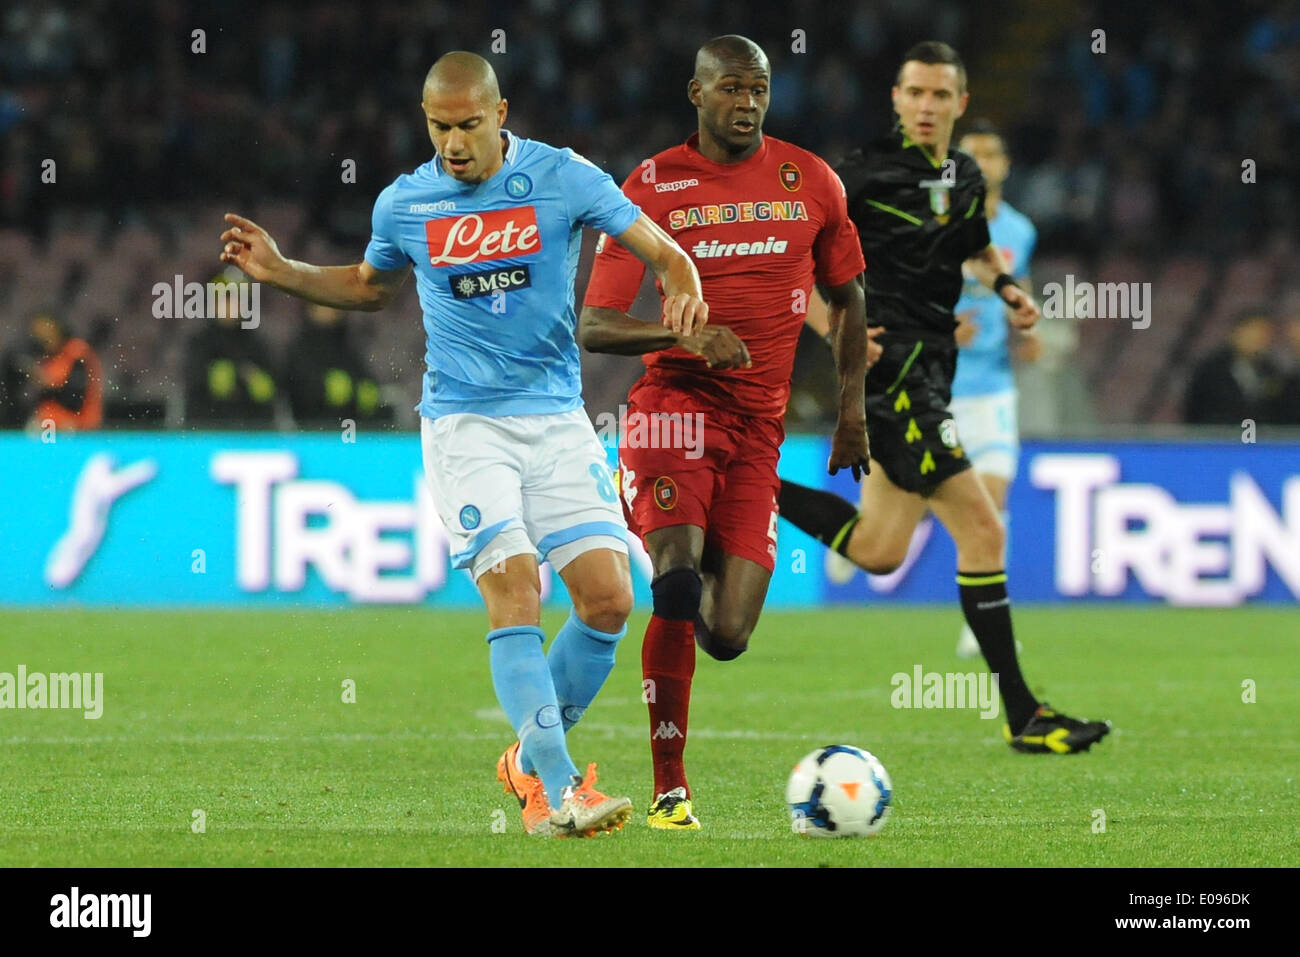 Naples, Italy. 6th May, 2014. Gokhan Inler during Italian Serie A match between SSC Napoli and Cagliari Calcio Football/Soccer at Stadio San Paolo on May 6, 2014 in Naples, Italy. © Franco Romano/NurPhoto/ZUMAPRESS.com/Alamy Live News Stock Photo